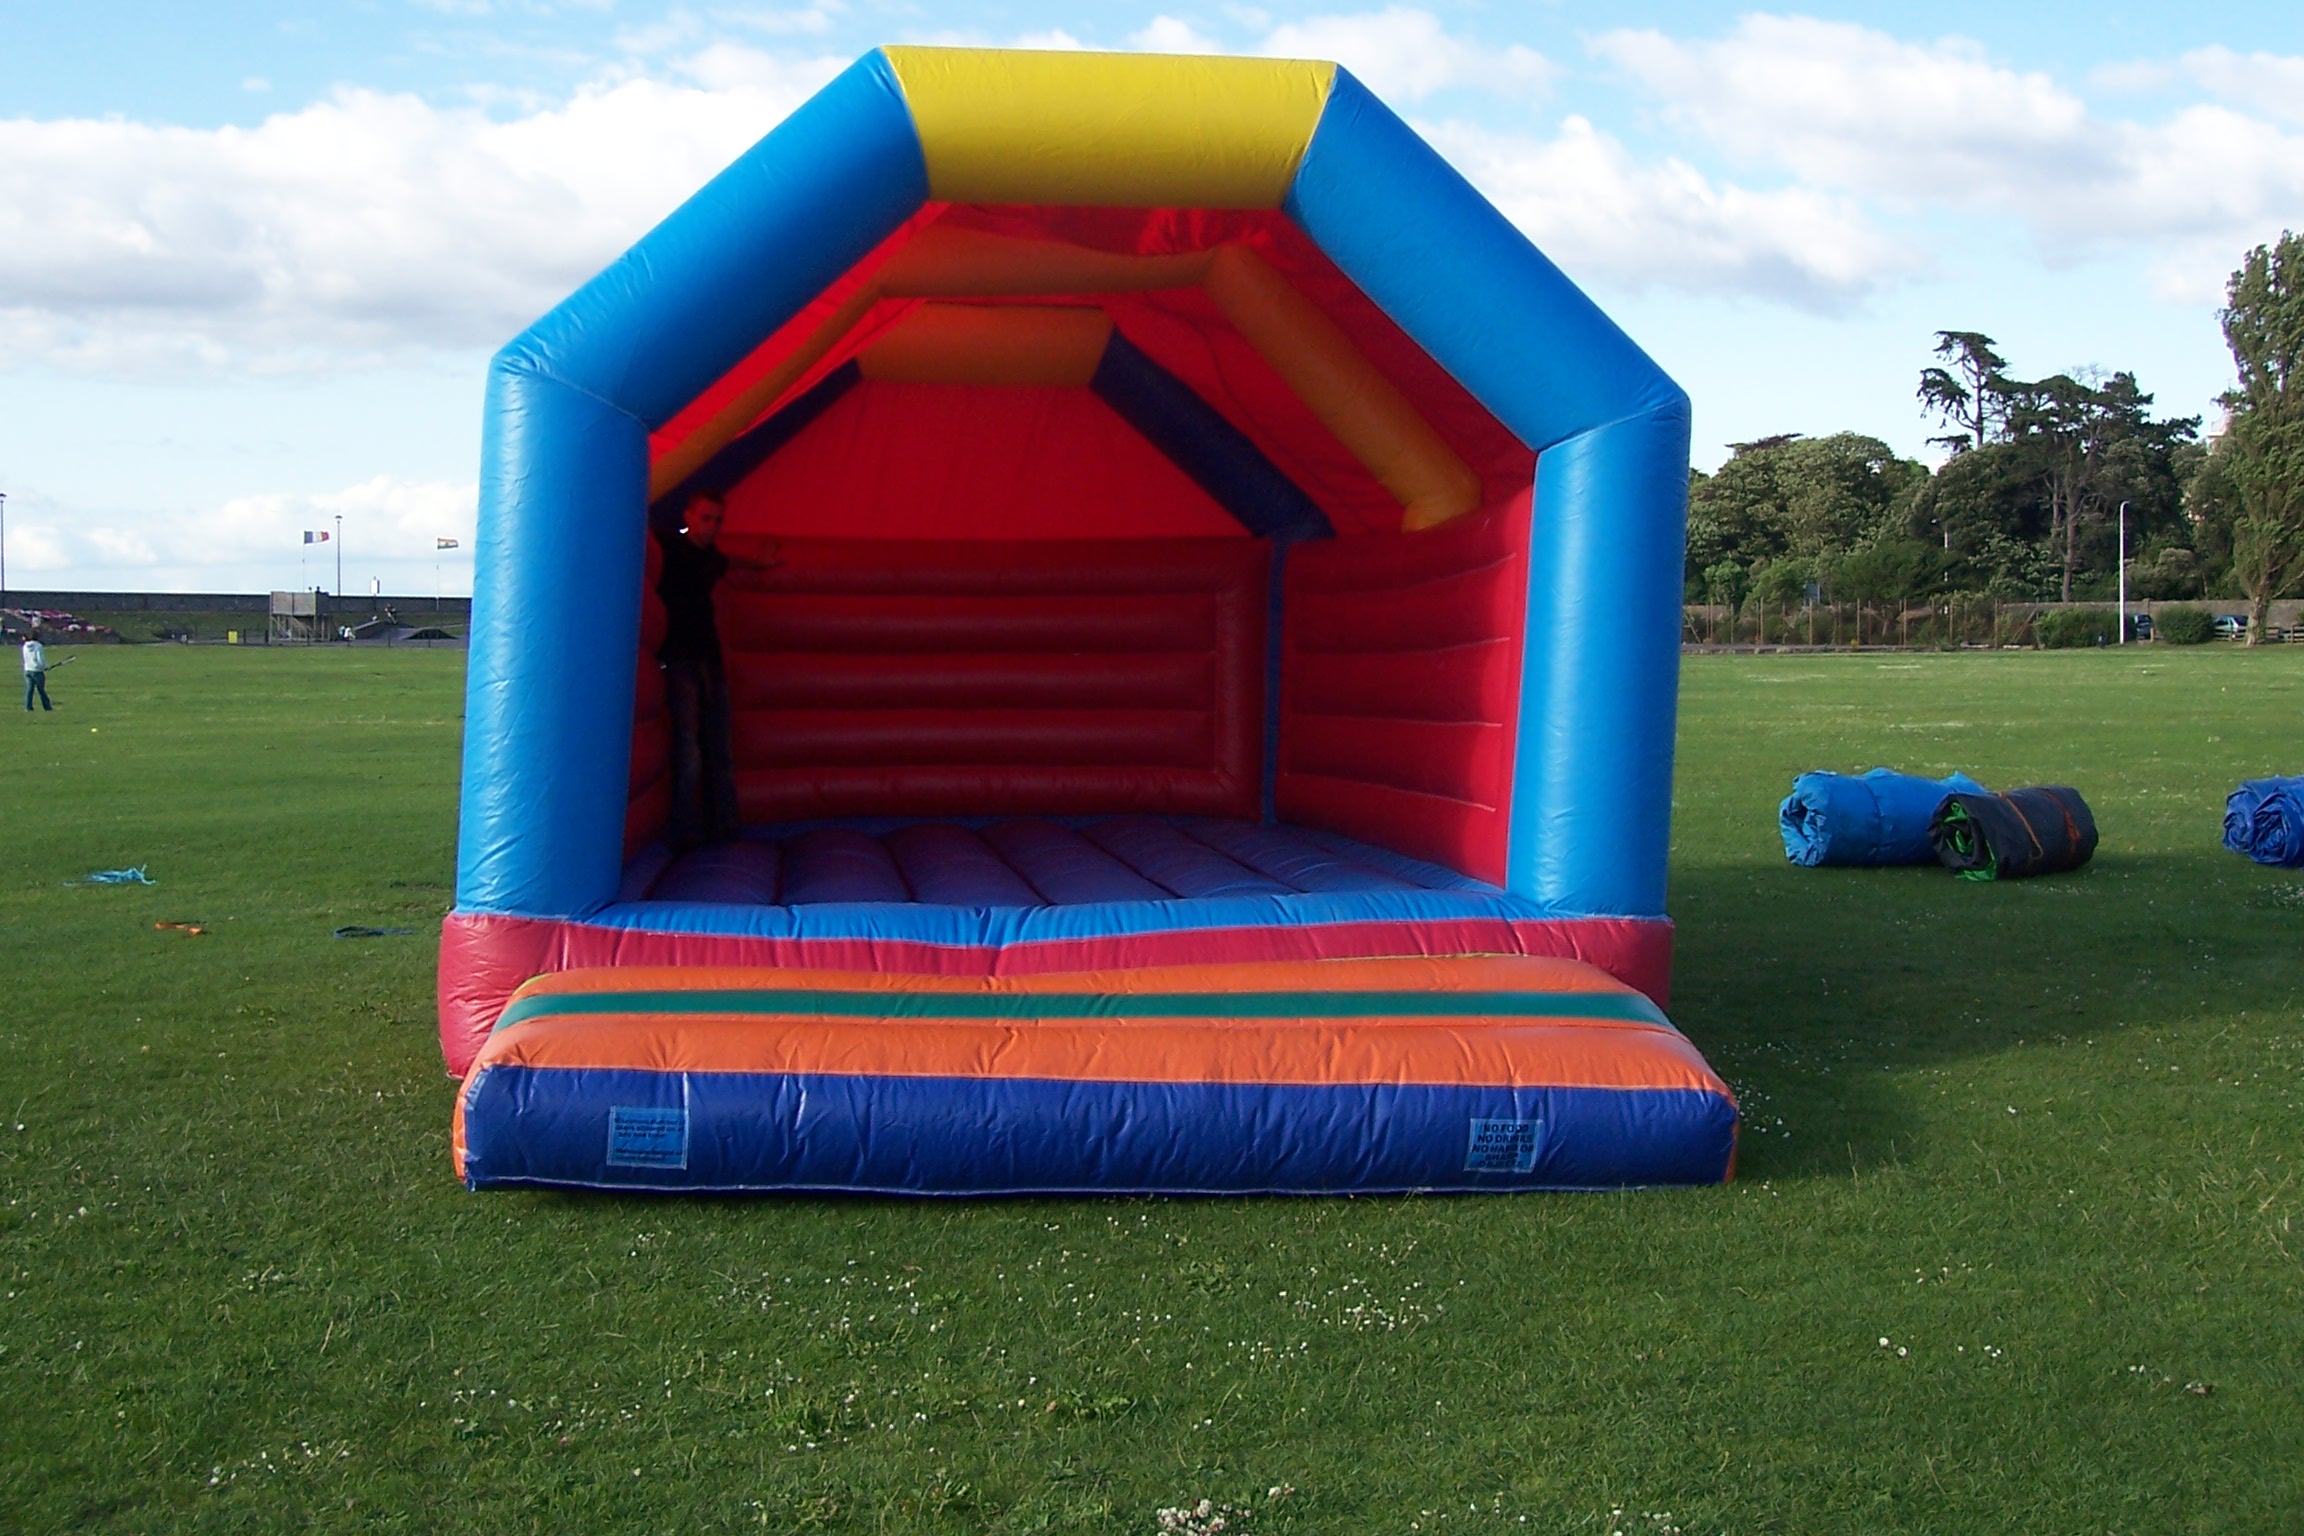 This value for money Bumper Castle is great for super bouncing in medium sized spaces! Not too big, not too small, this bouncy castle is just right! Suitable for ages up to 14 years.